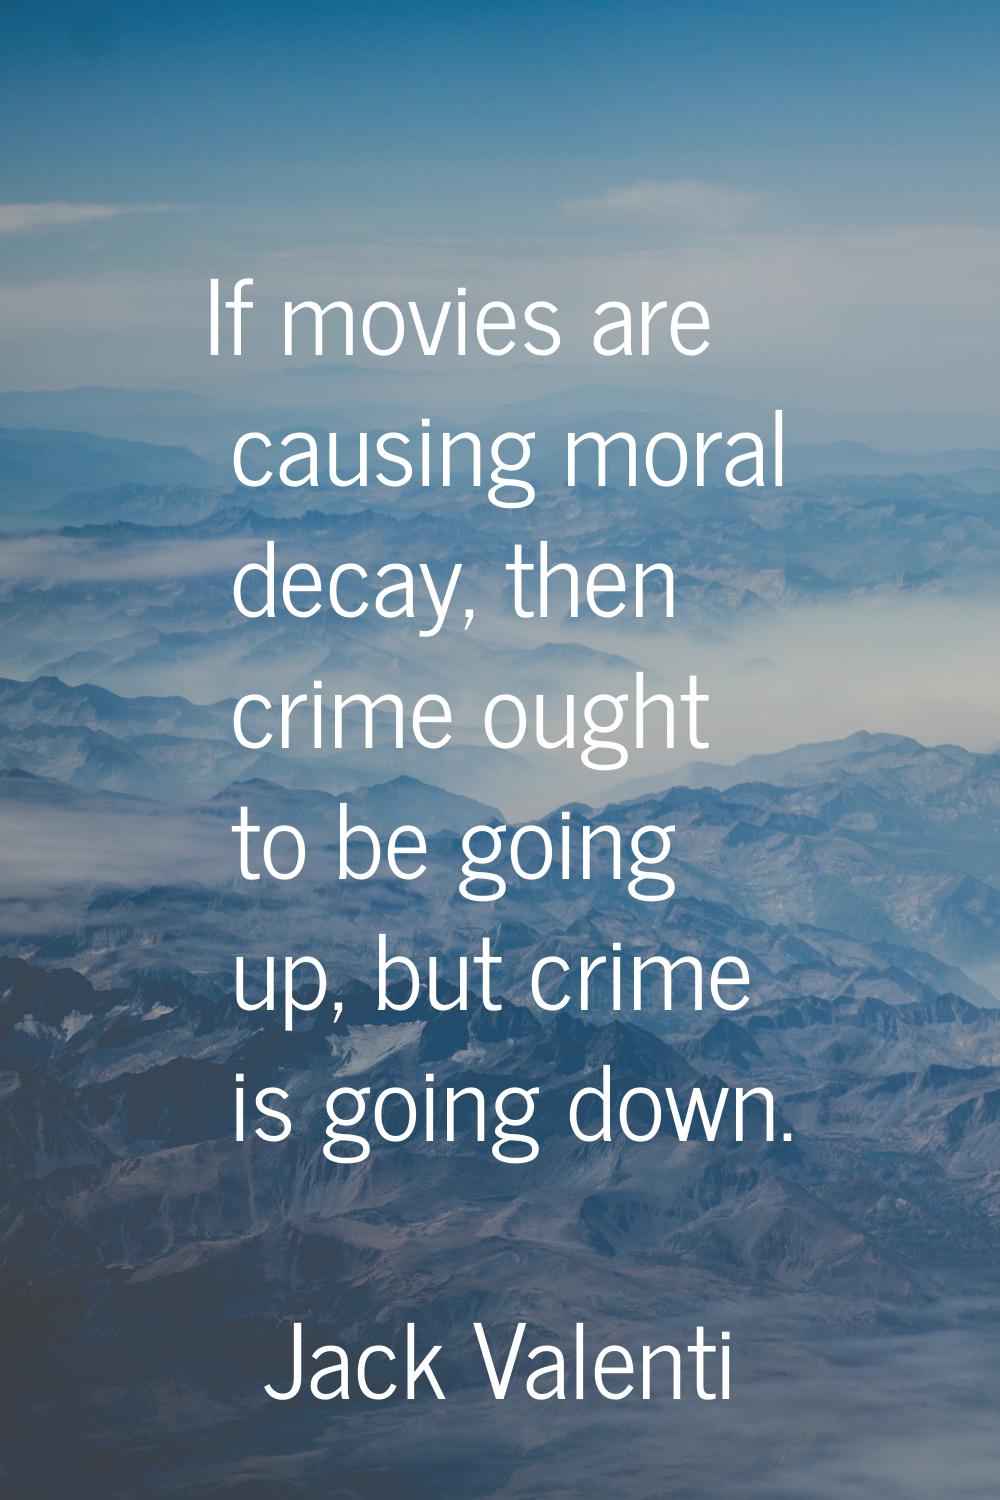 If movies are causing moral decay, then crime ought to be going up, but crime is going down.